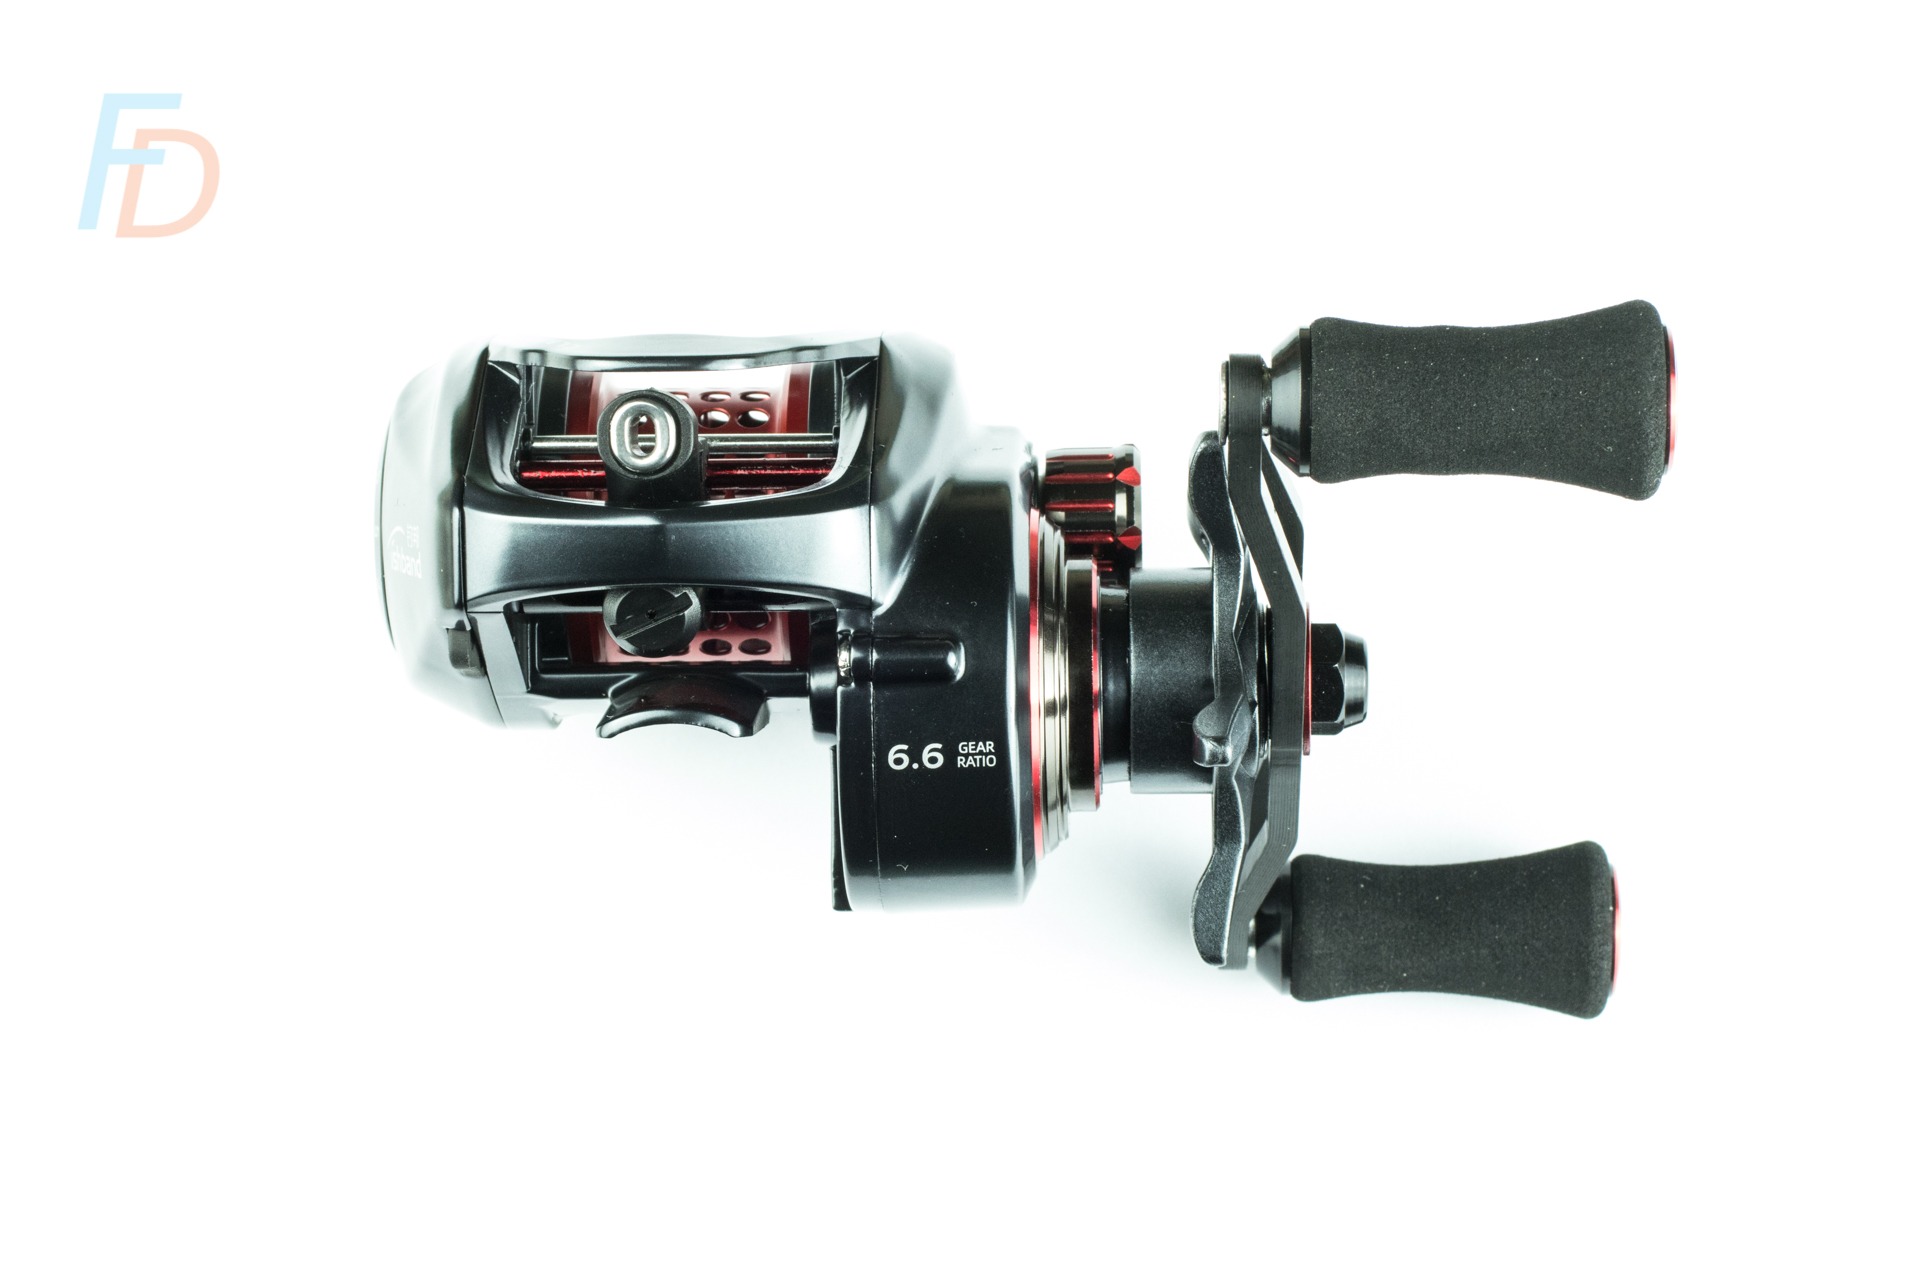 Low profile Bait Finesse System Reel: CR-HM06 from Fishband